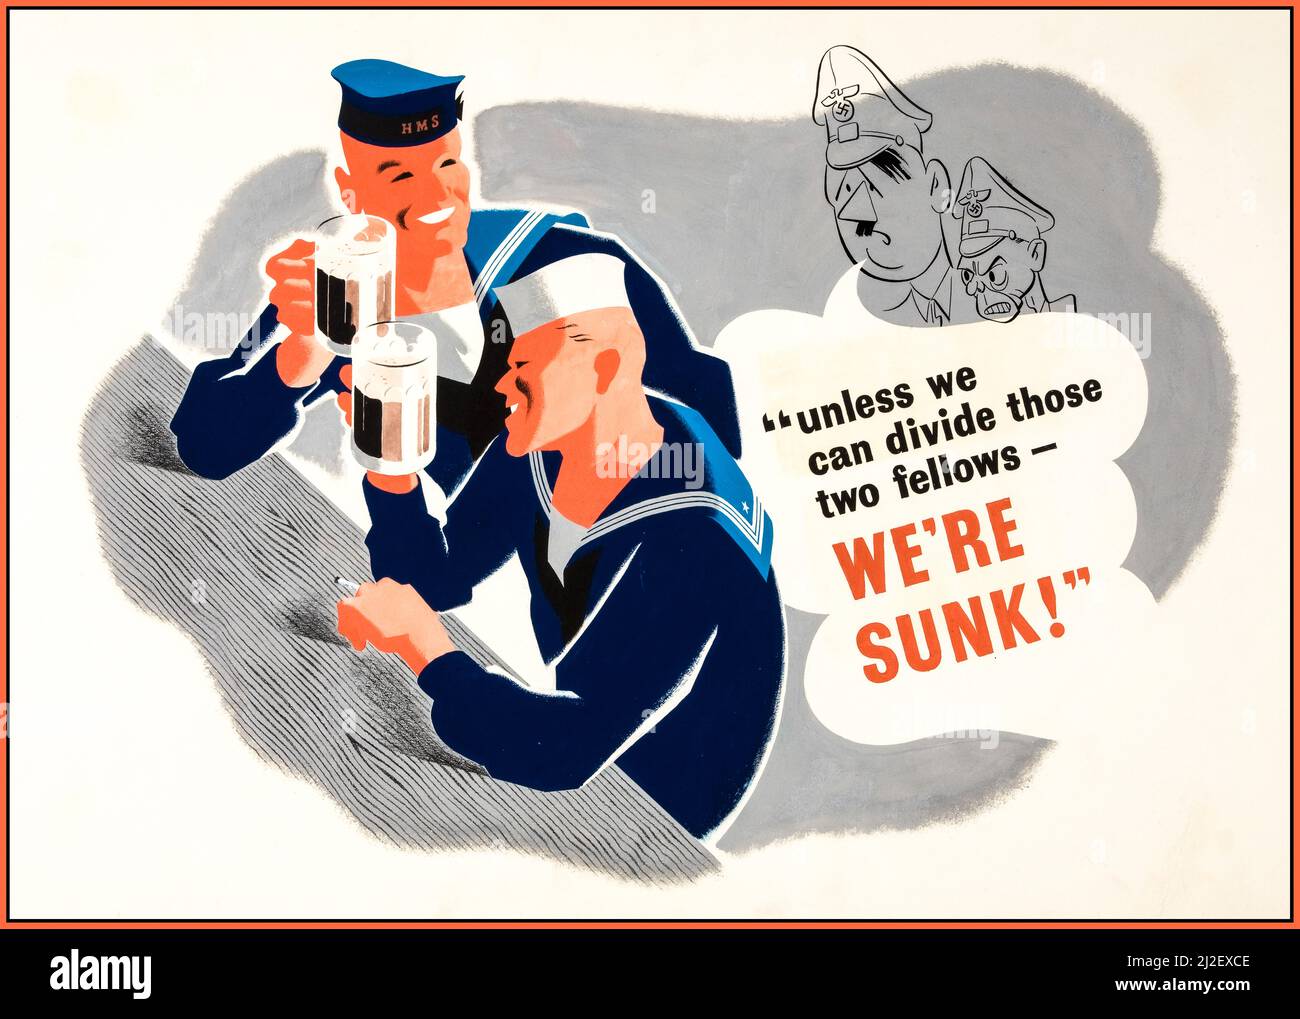 WW2 Propaganda Poster 'Unless we can divide those two fellows - we're sunk!' World War II propaganda poster focusing on the Anglo-American Navy alliance. Cartoon Caricature Hitler and Goebbels are in the background. World War II Second World War Date between 1940 and 1945 Stock Photo